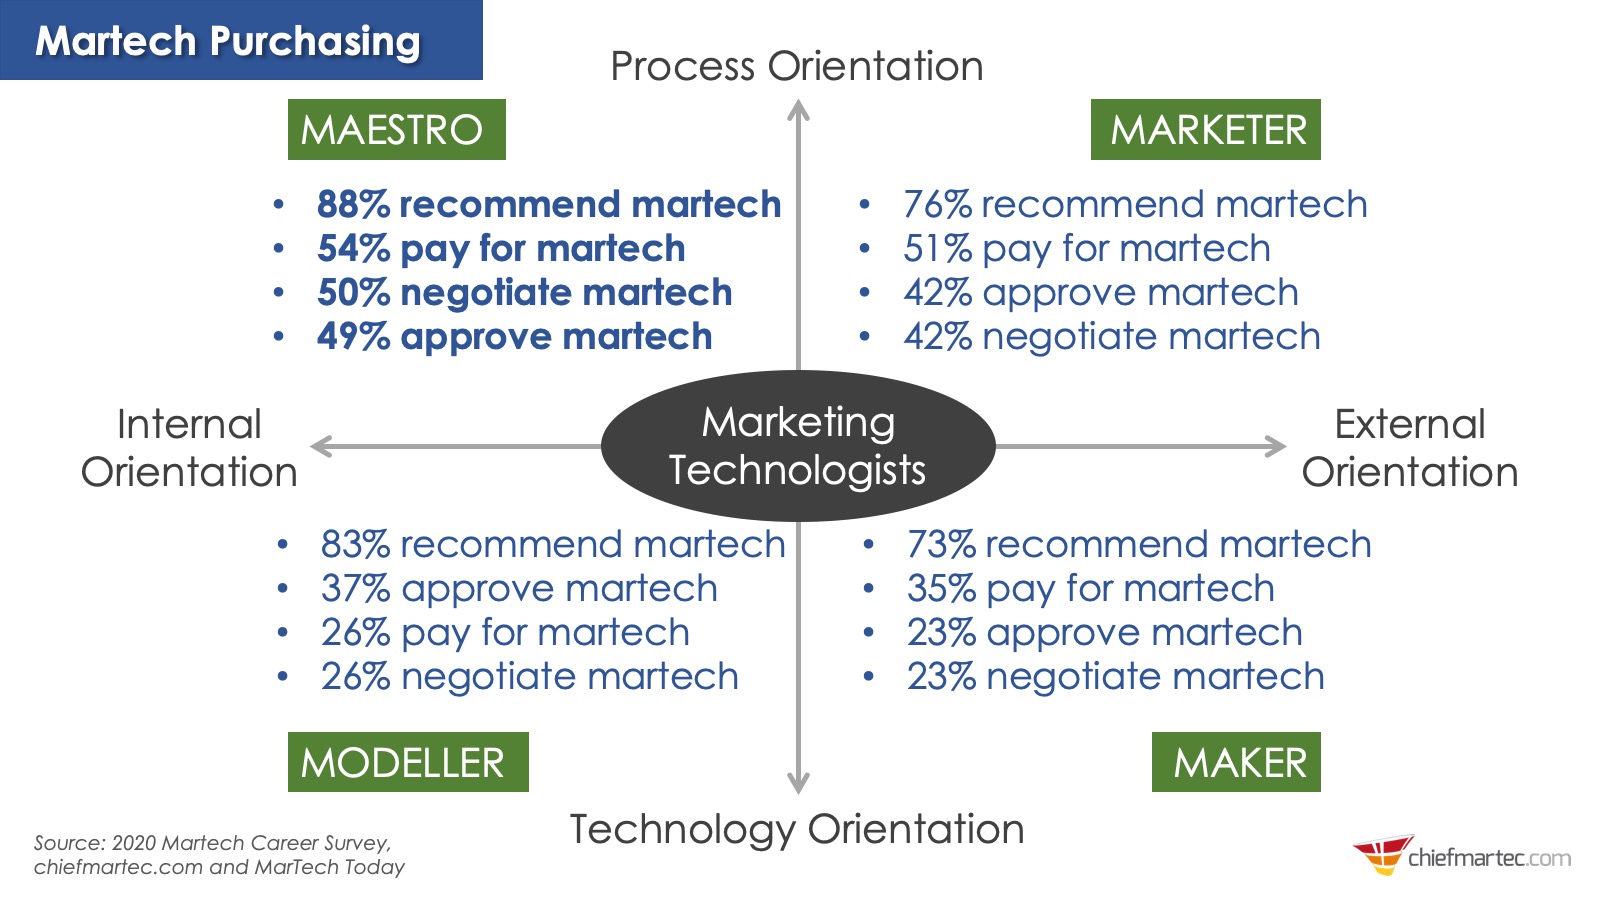 Martech Purchasing Responsibilities by Role